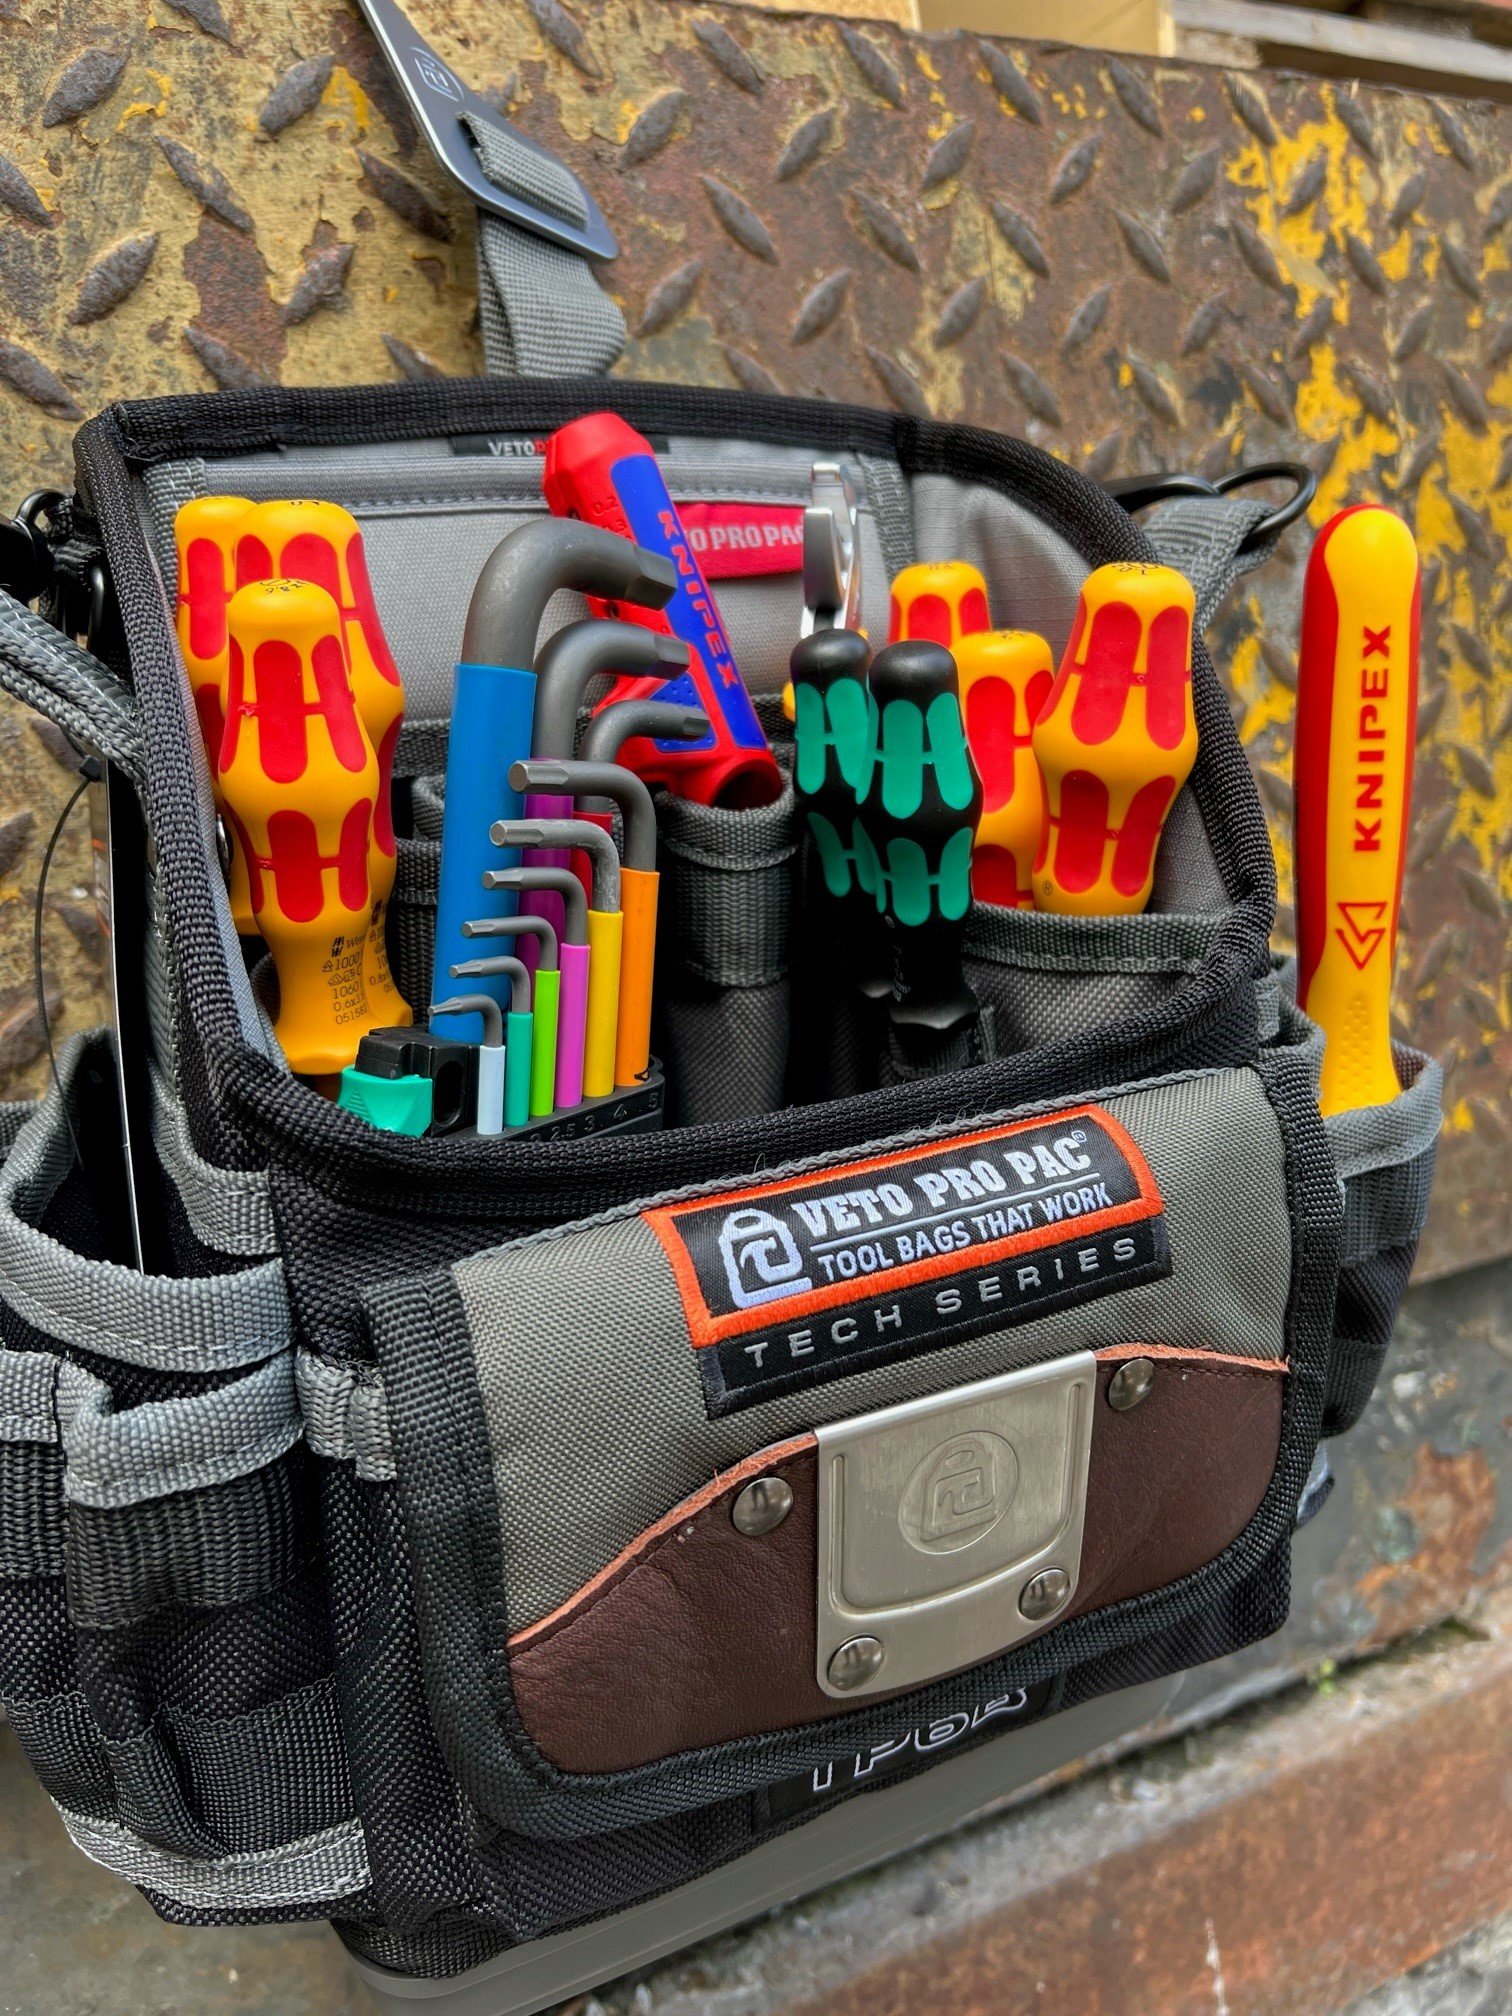 Tool Bags, Tool Backpacks and Tool Storage That Works - VetoProPac